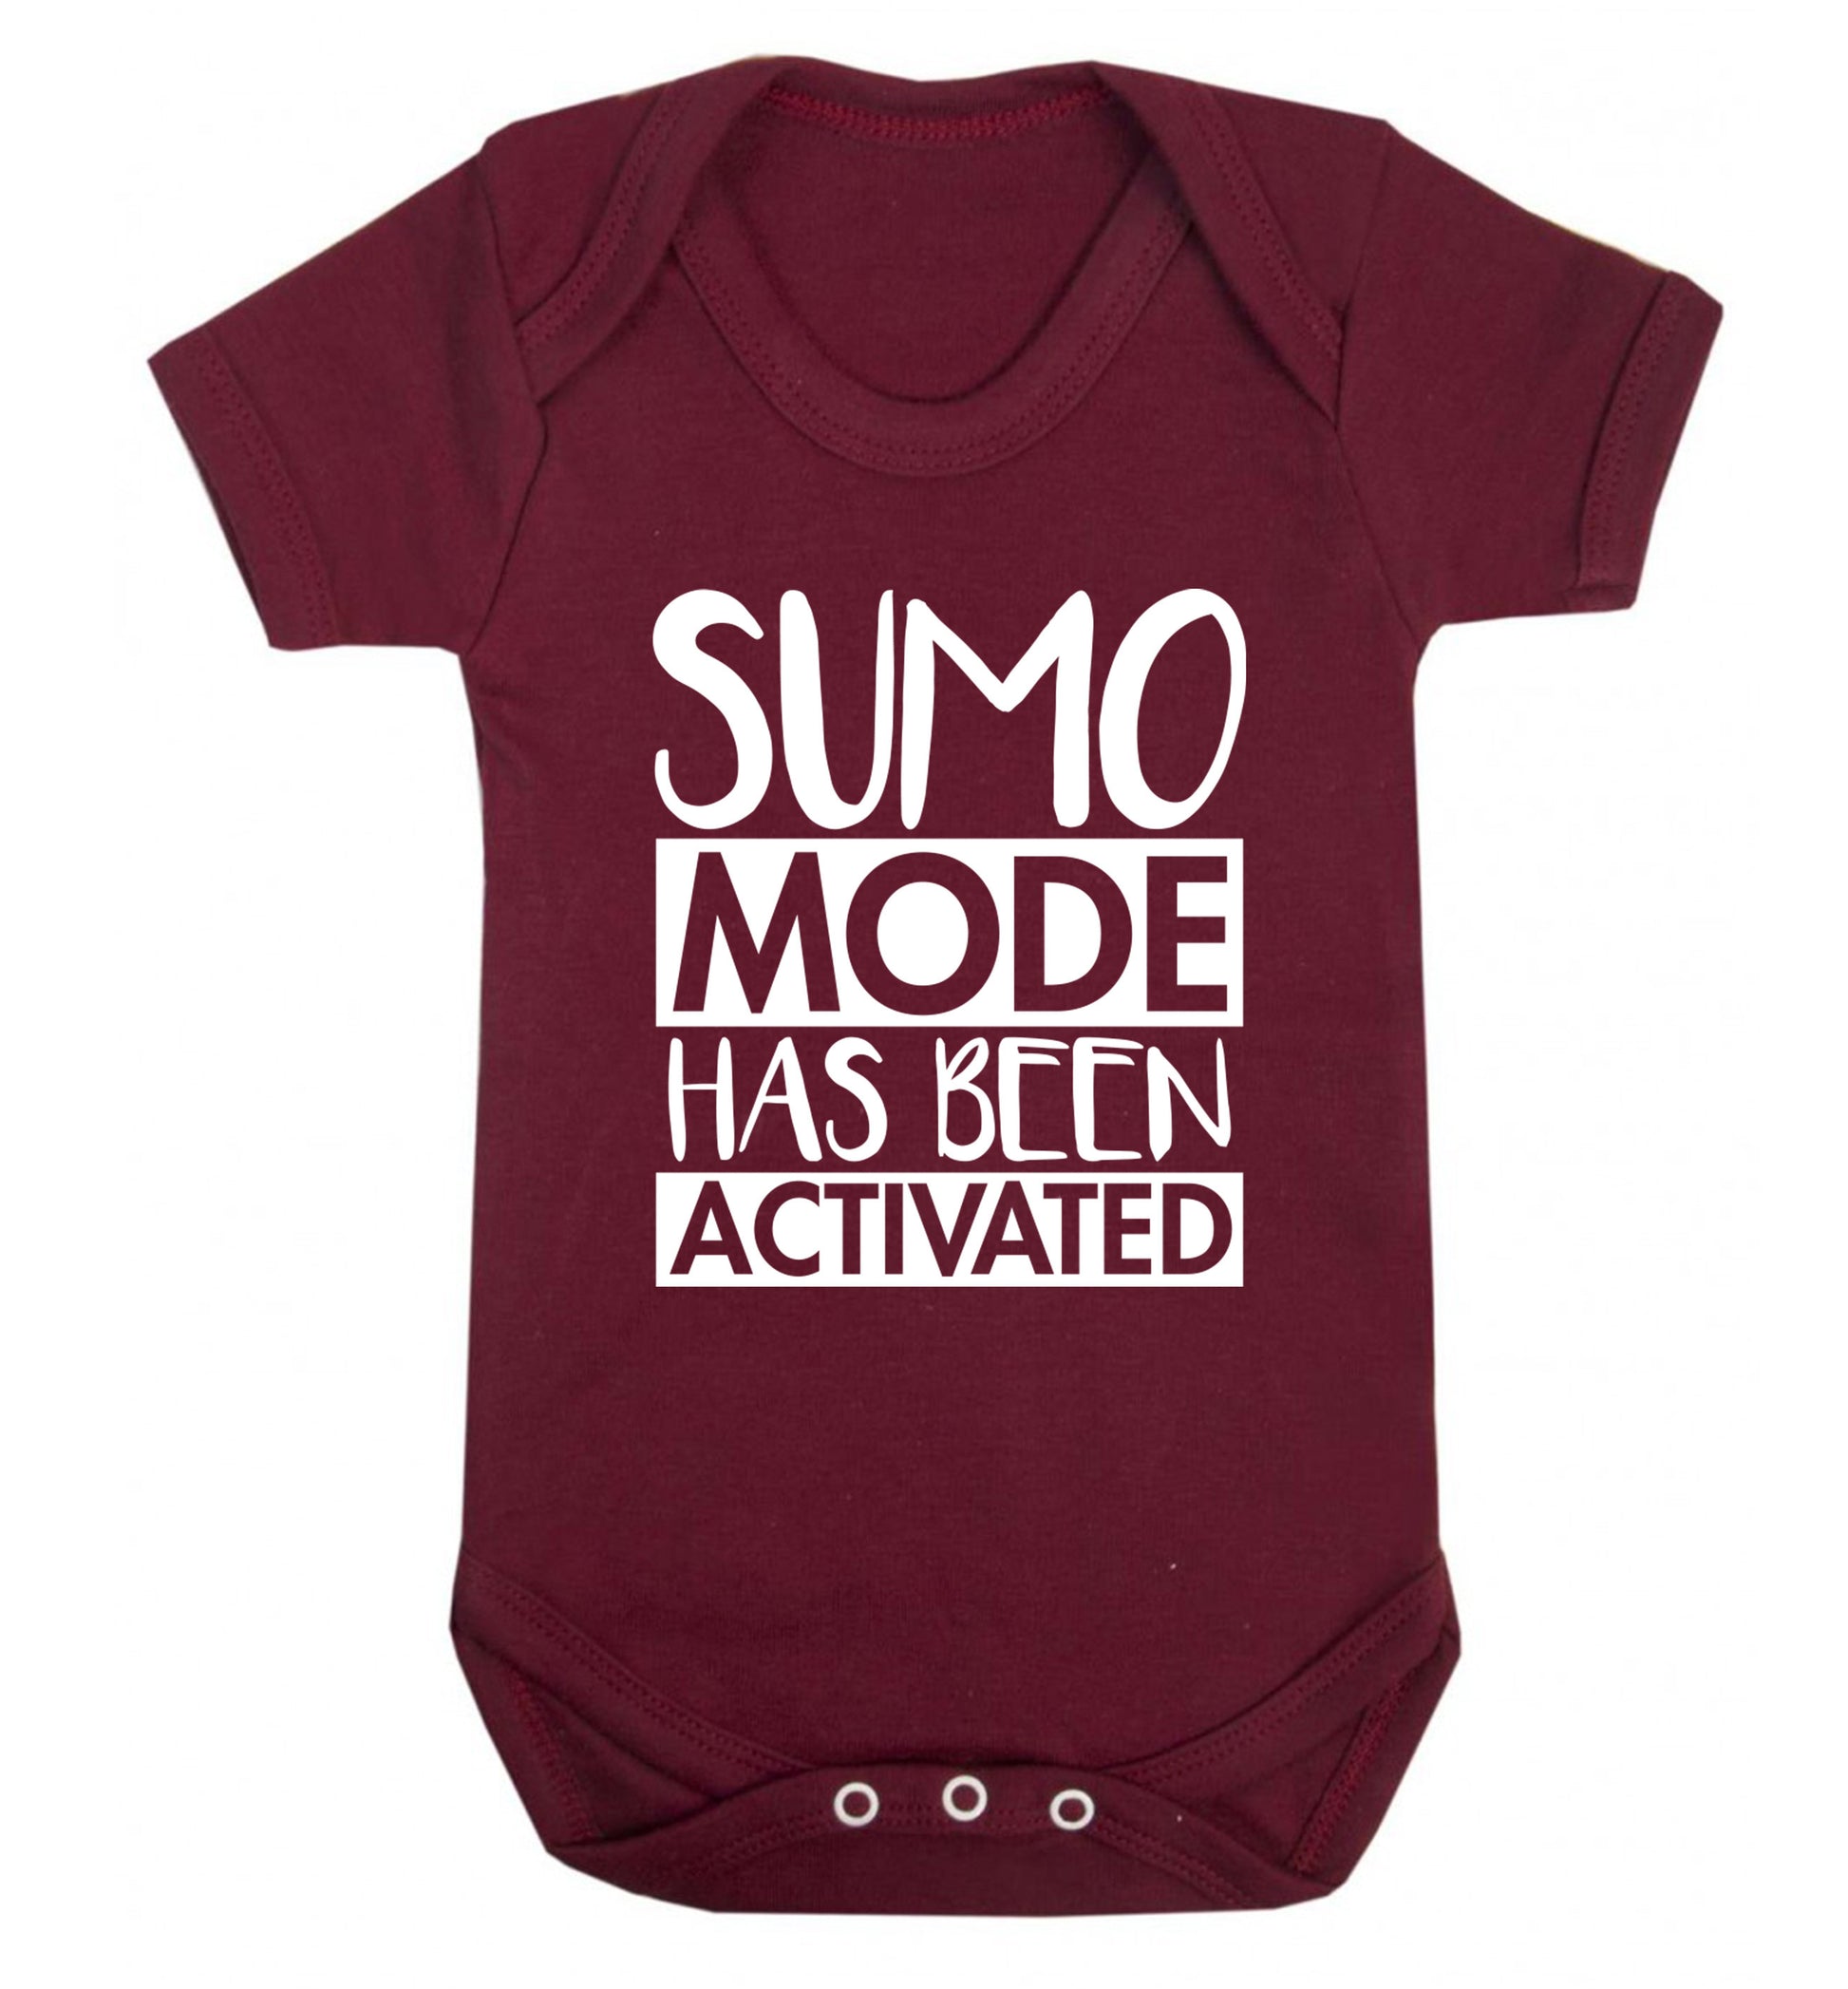 Sumo mode activated Baby Vest maroon 18-24 months